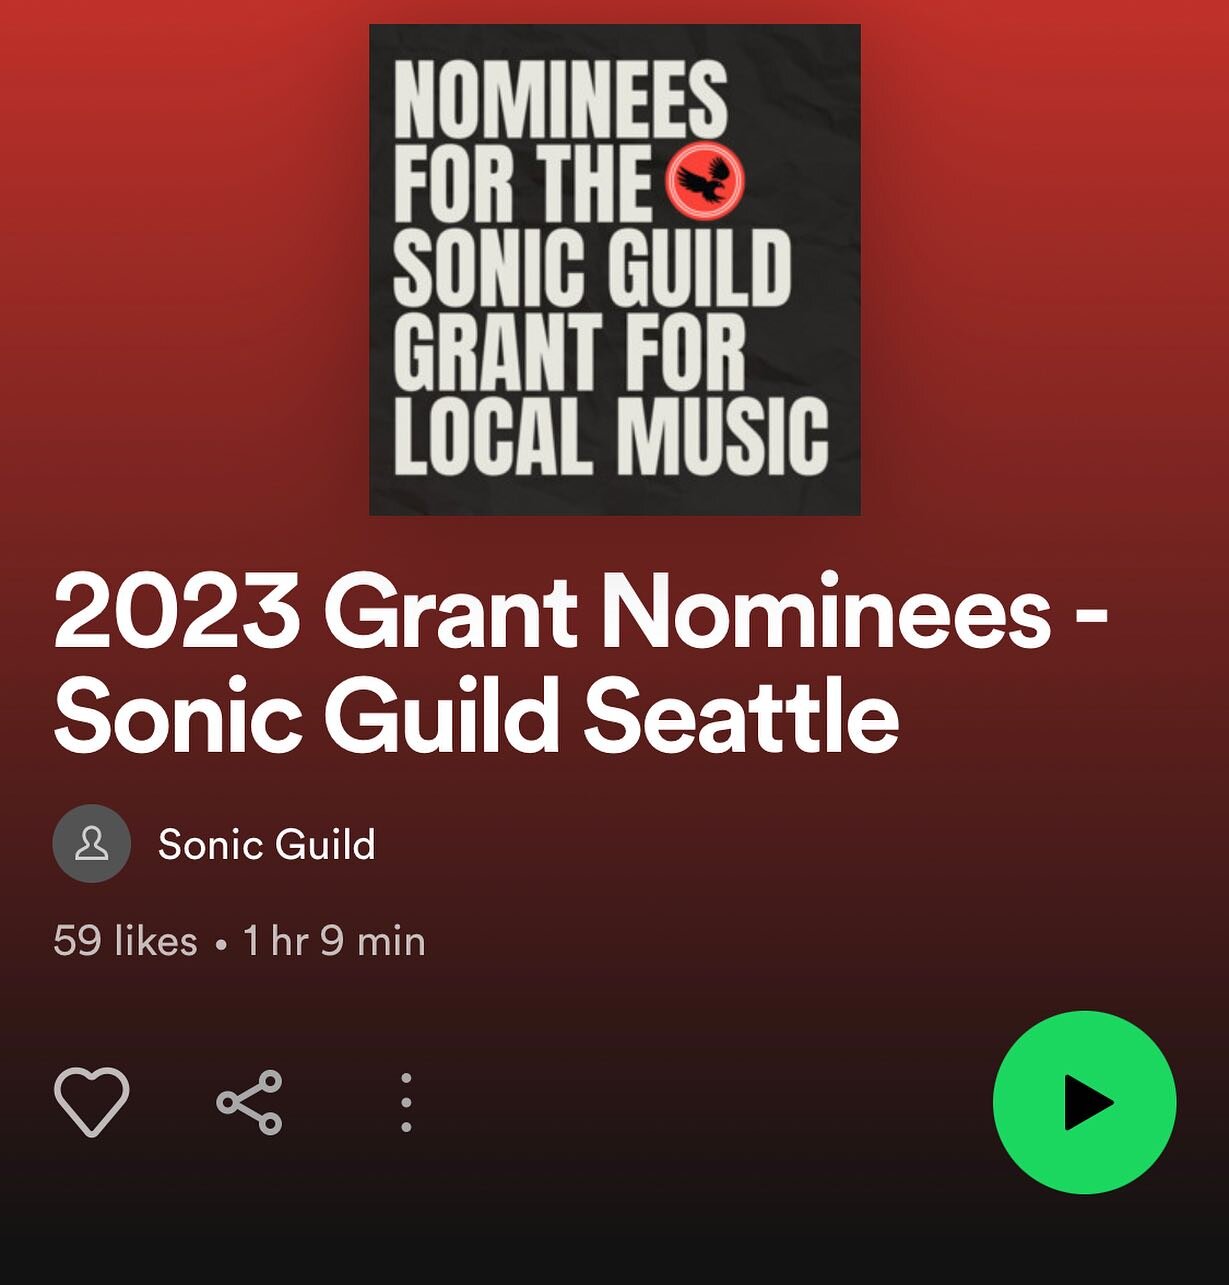 We&rsquo;re humbled and super stoked to be be nominated and featured among so many incredible artists. This grant would be a game changer for us, we&rsquo;d appreciate your support in voting for us! @sonicguildseattlewa